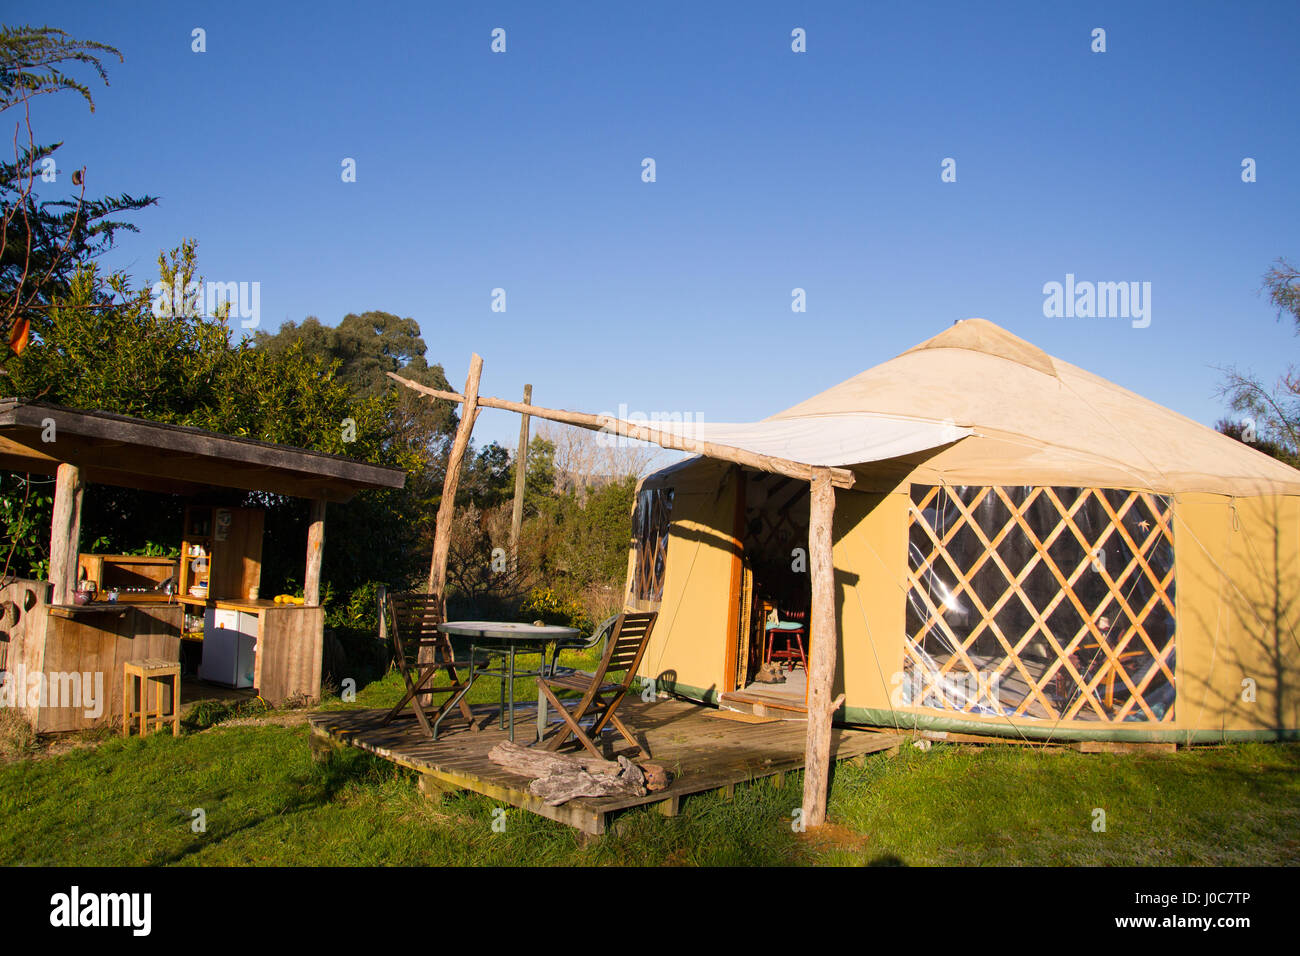 A beautiful yurt and outdoor kitchen on a sunny day in rural New Zealand. Stock Photo